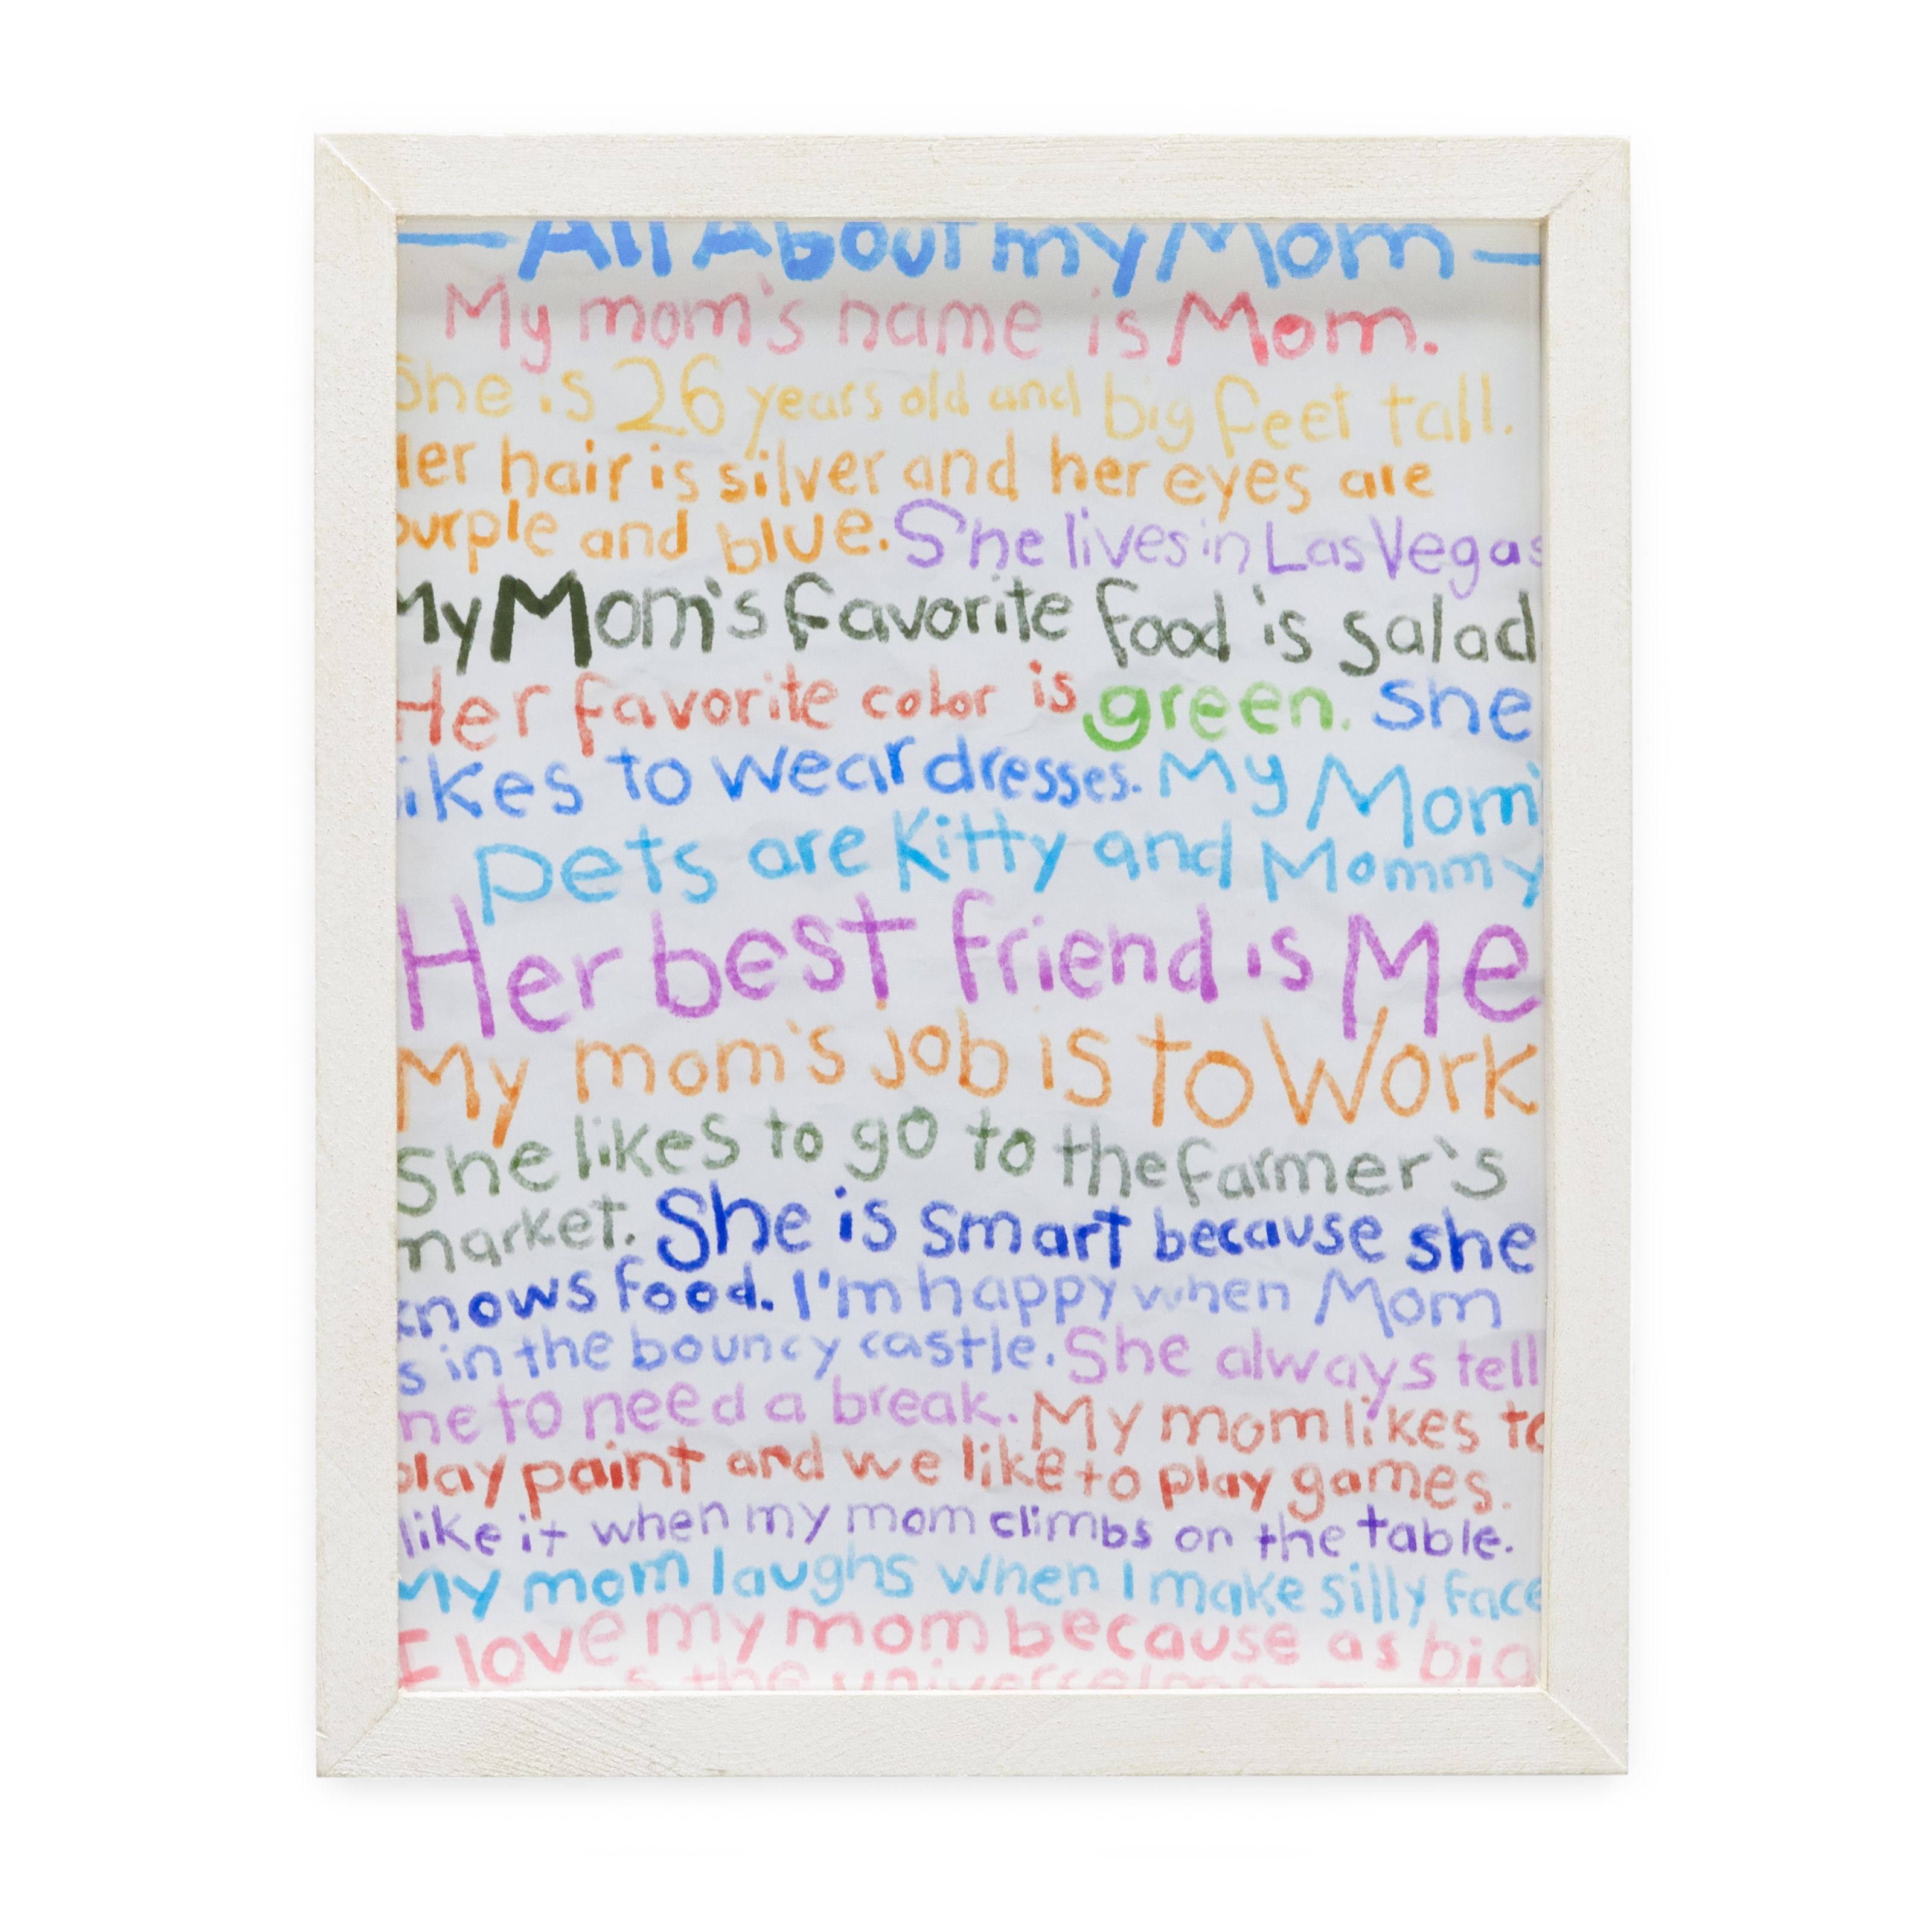 "All About My Mom" Print